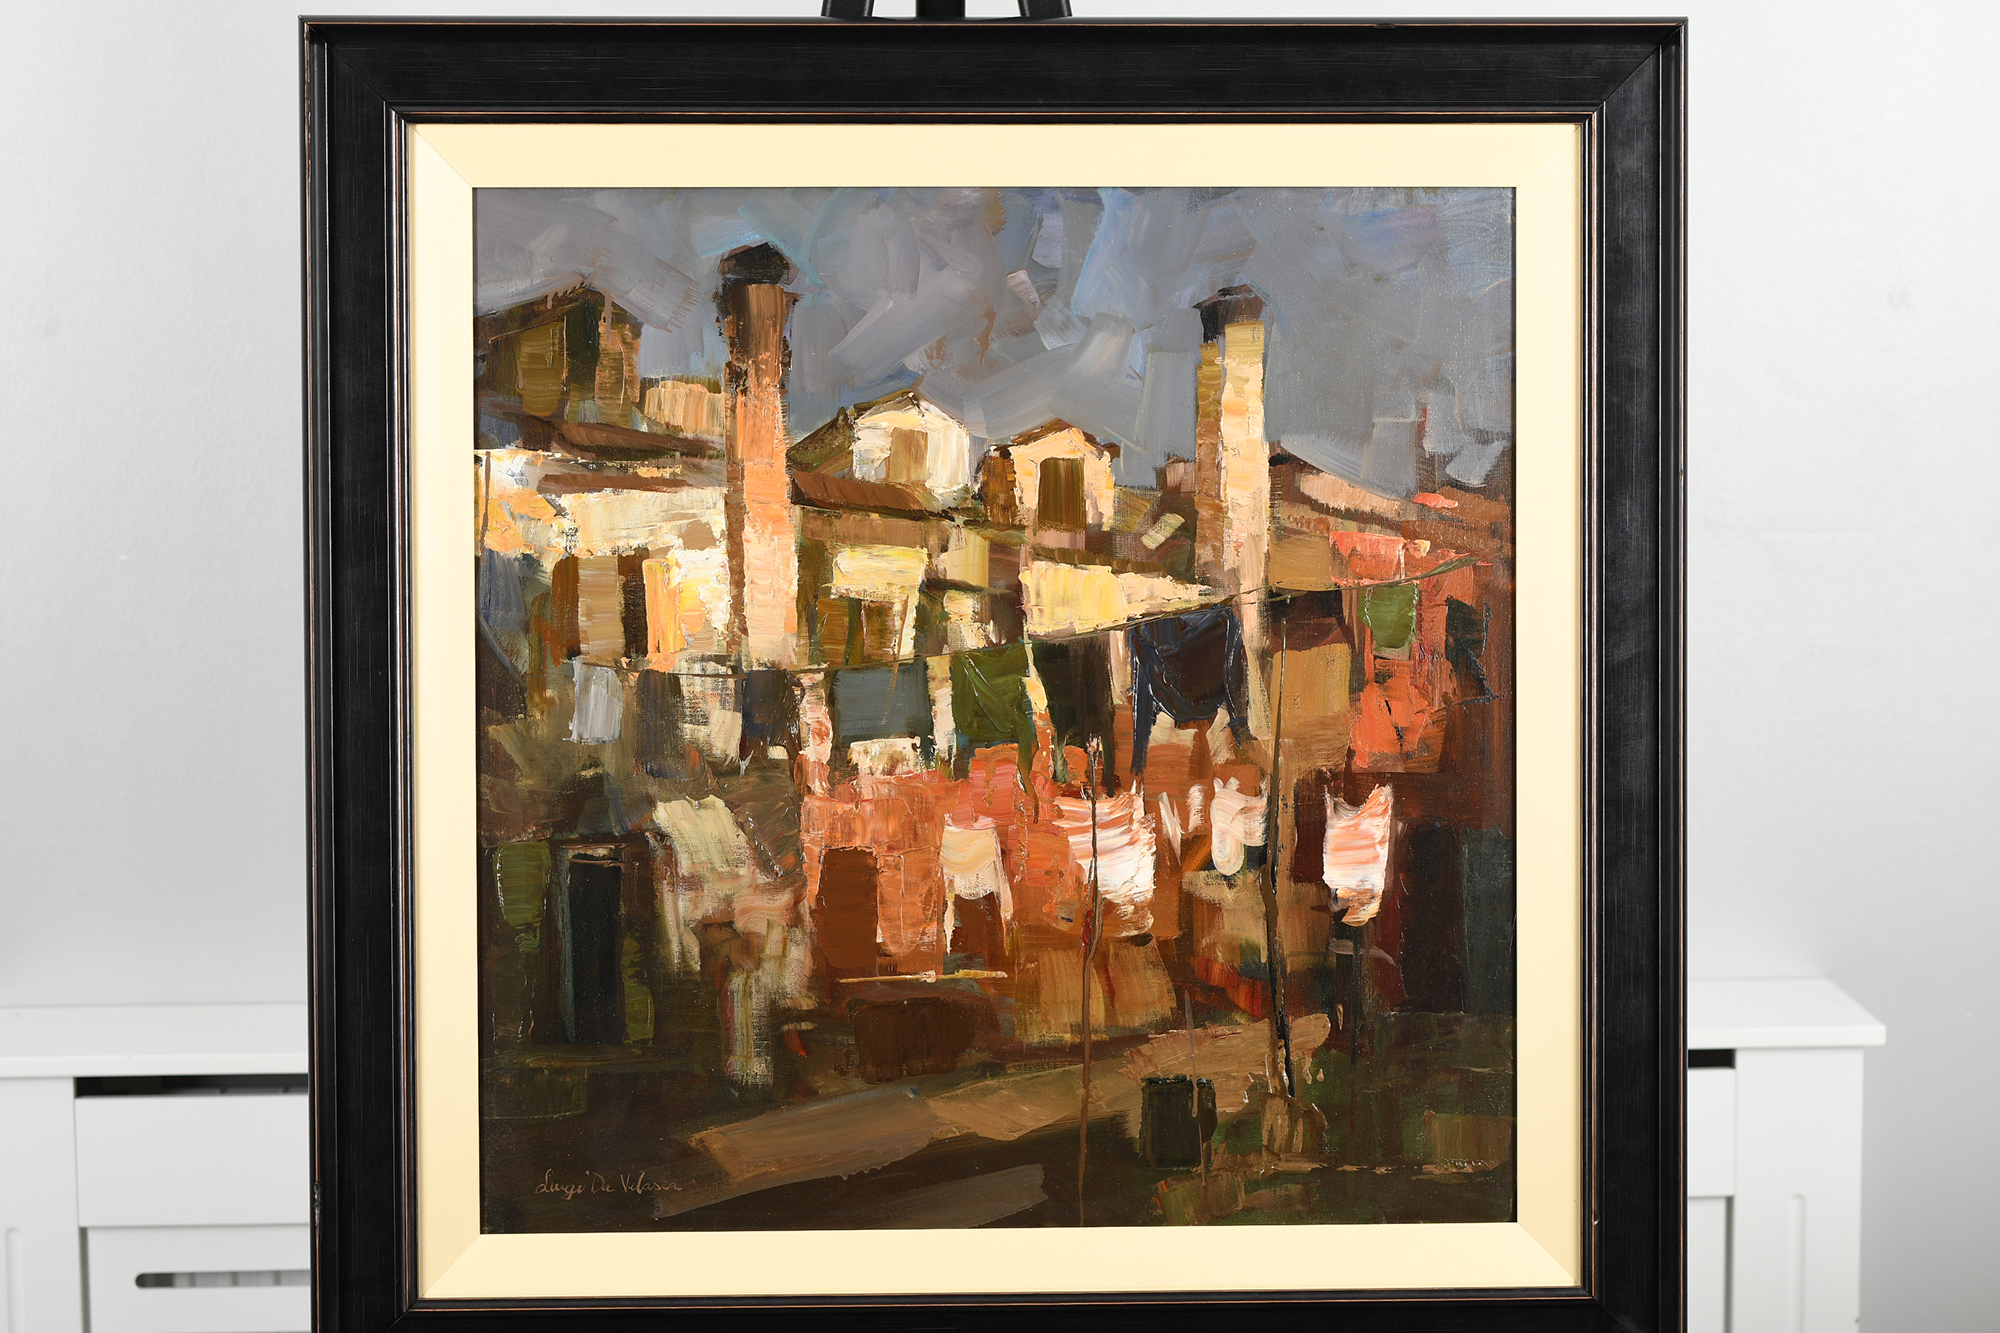 Di Valesca Oil on Canvas Framed - Image 7 of 7